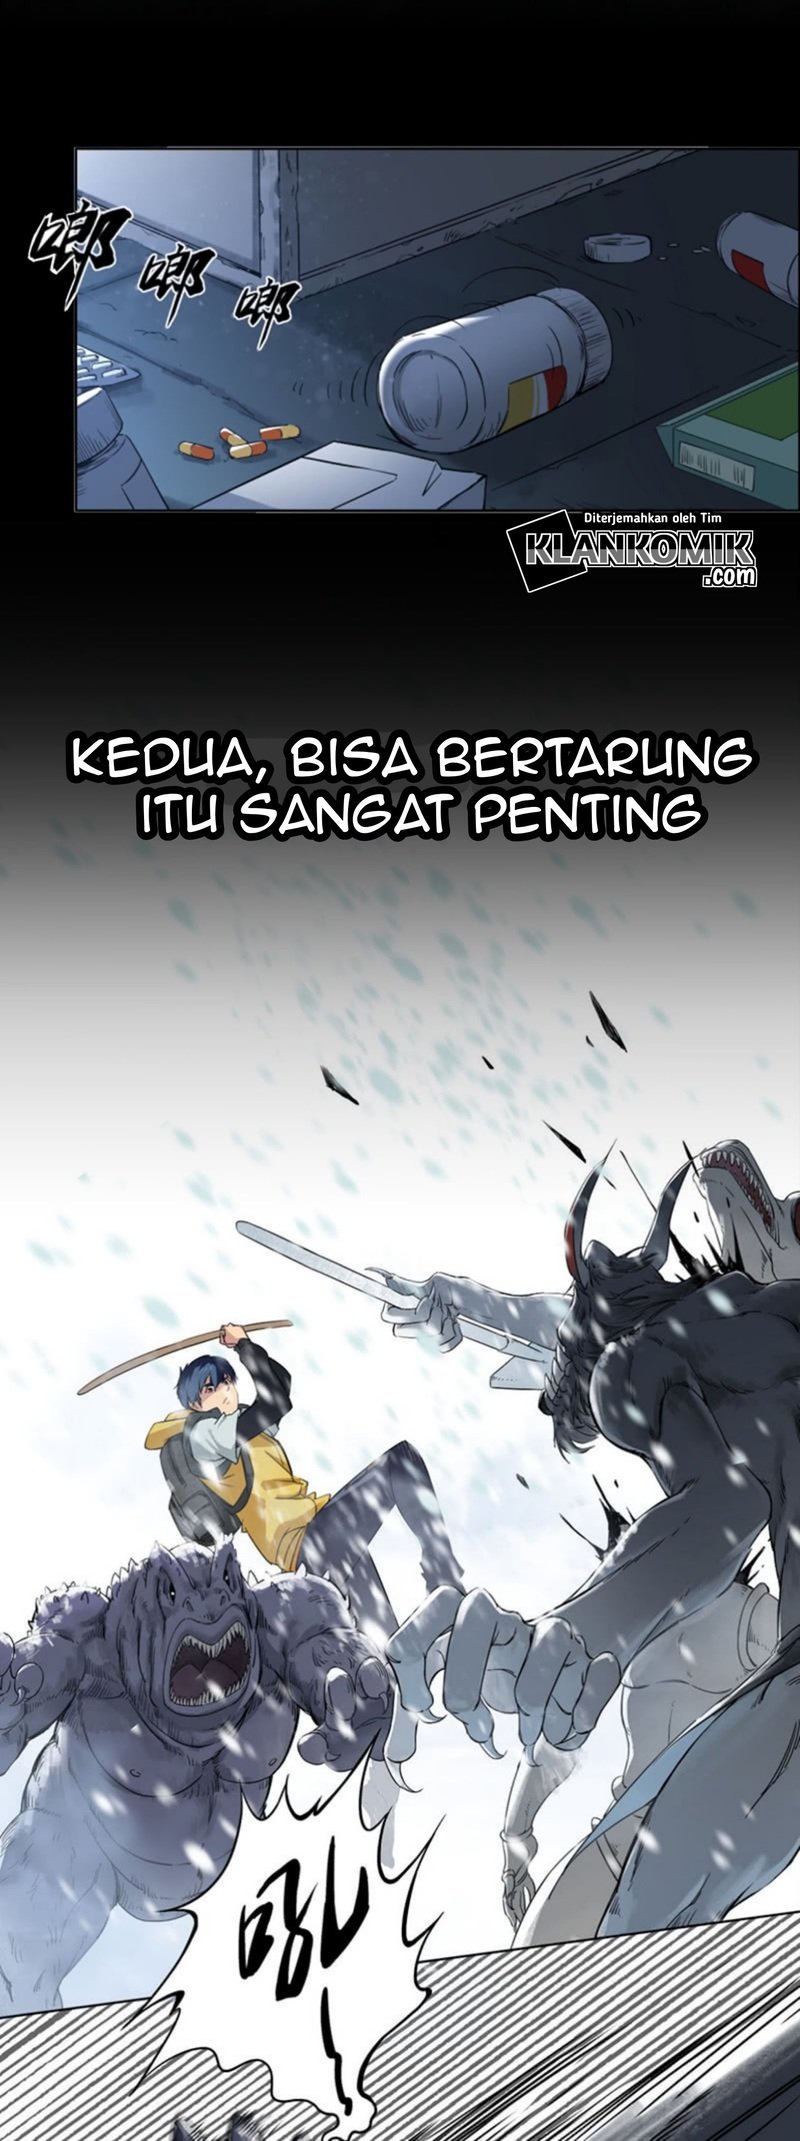 Baca Life In The End Times From Scratch Chapter 0  - GudangKomik